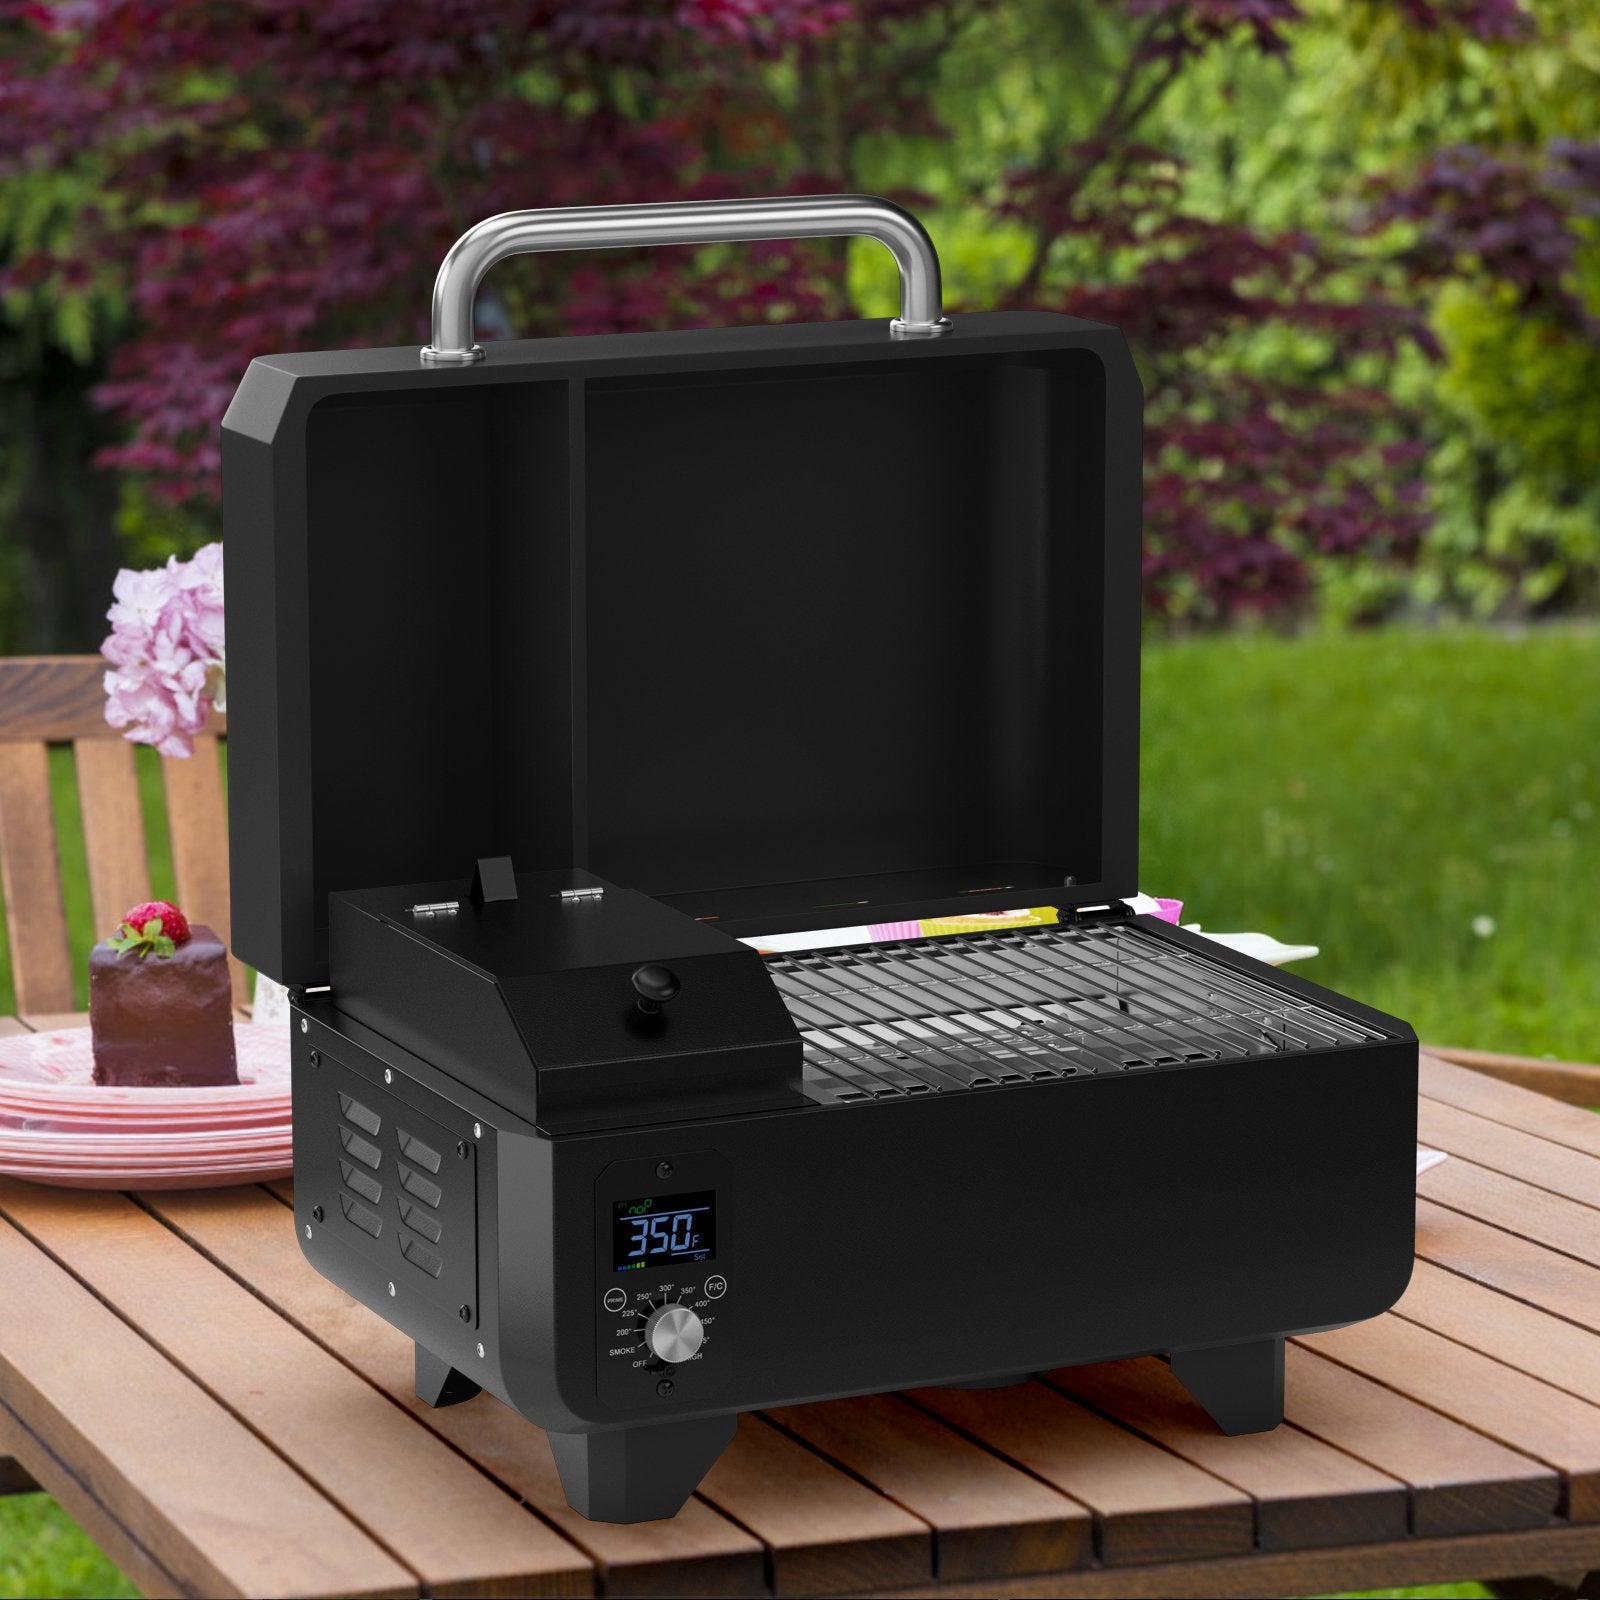 Outdoor Portable Tabletop Pellet Grill and Smoker with Digital Control System for BBQ, Black - Gallery Canada